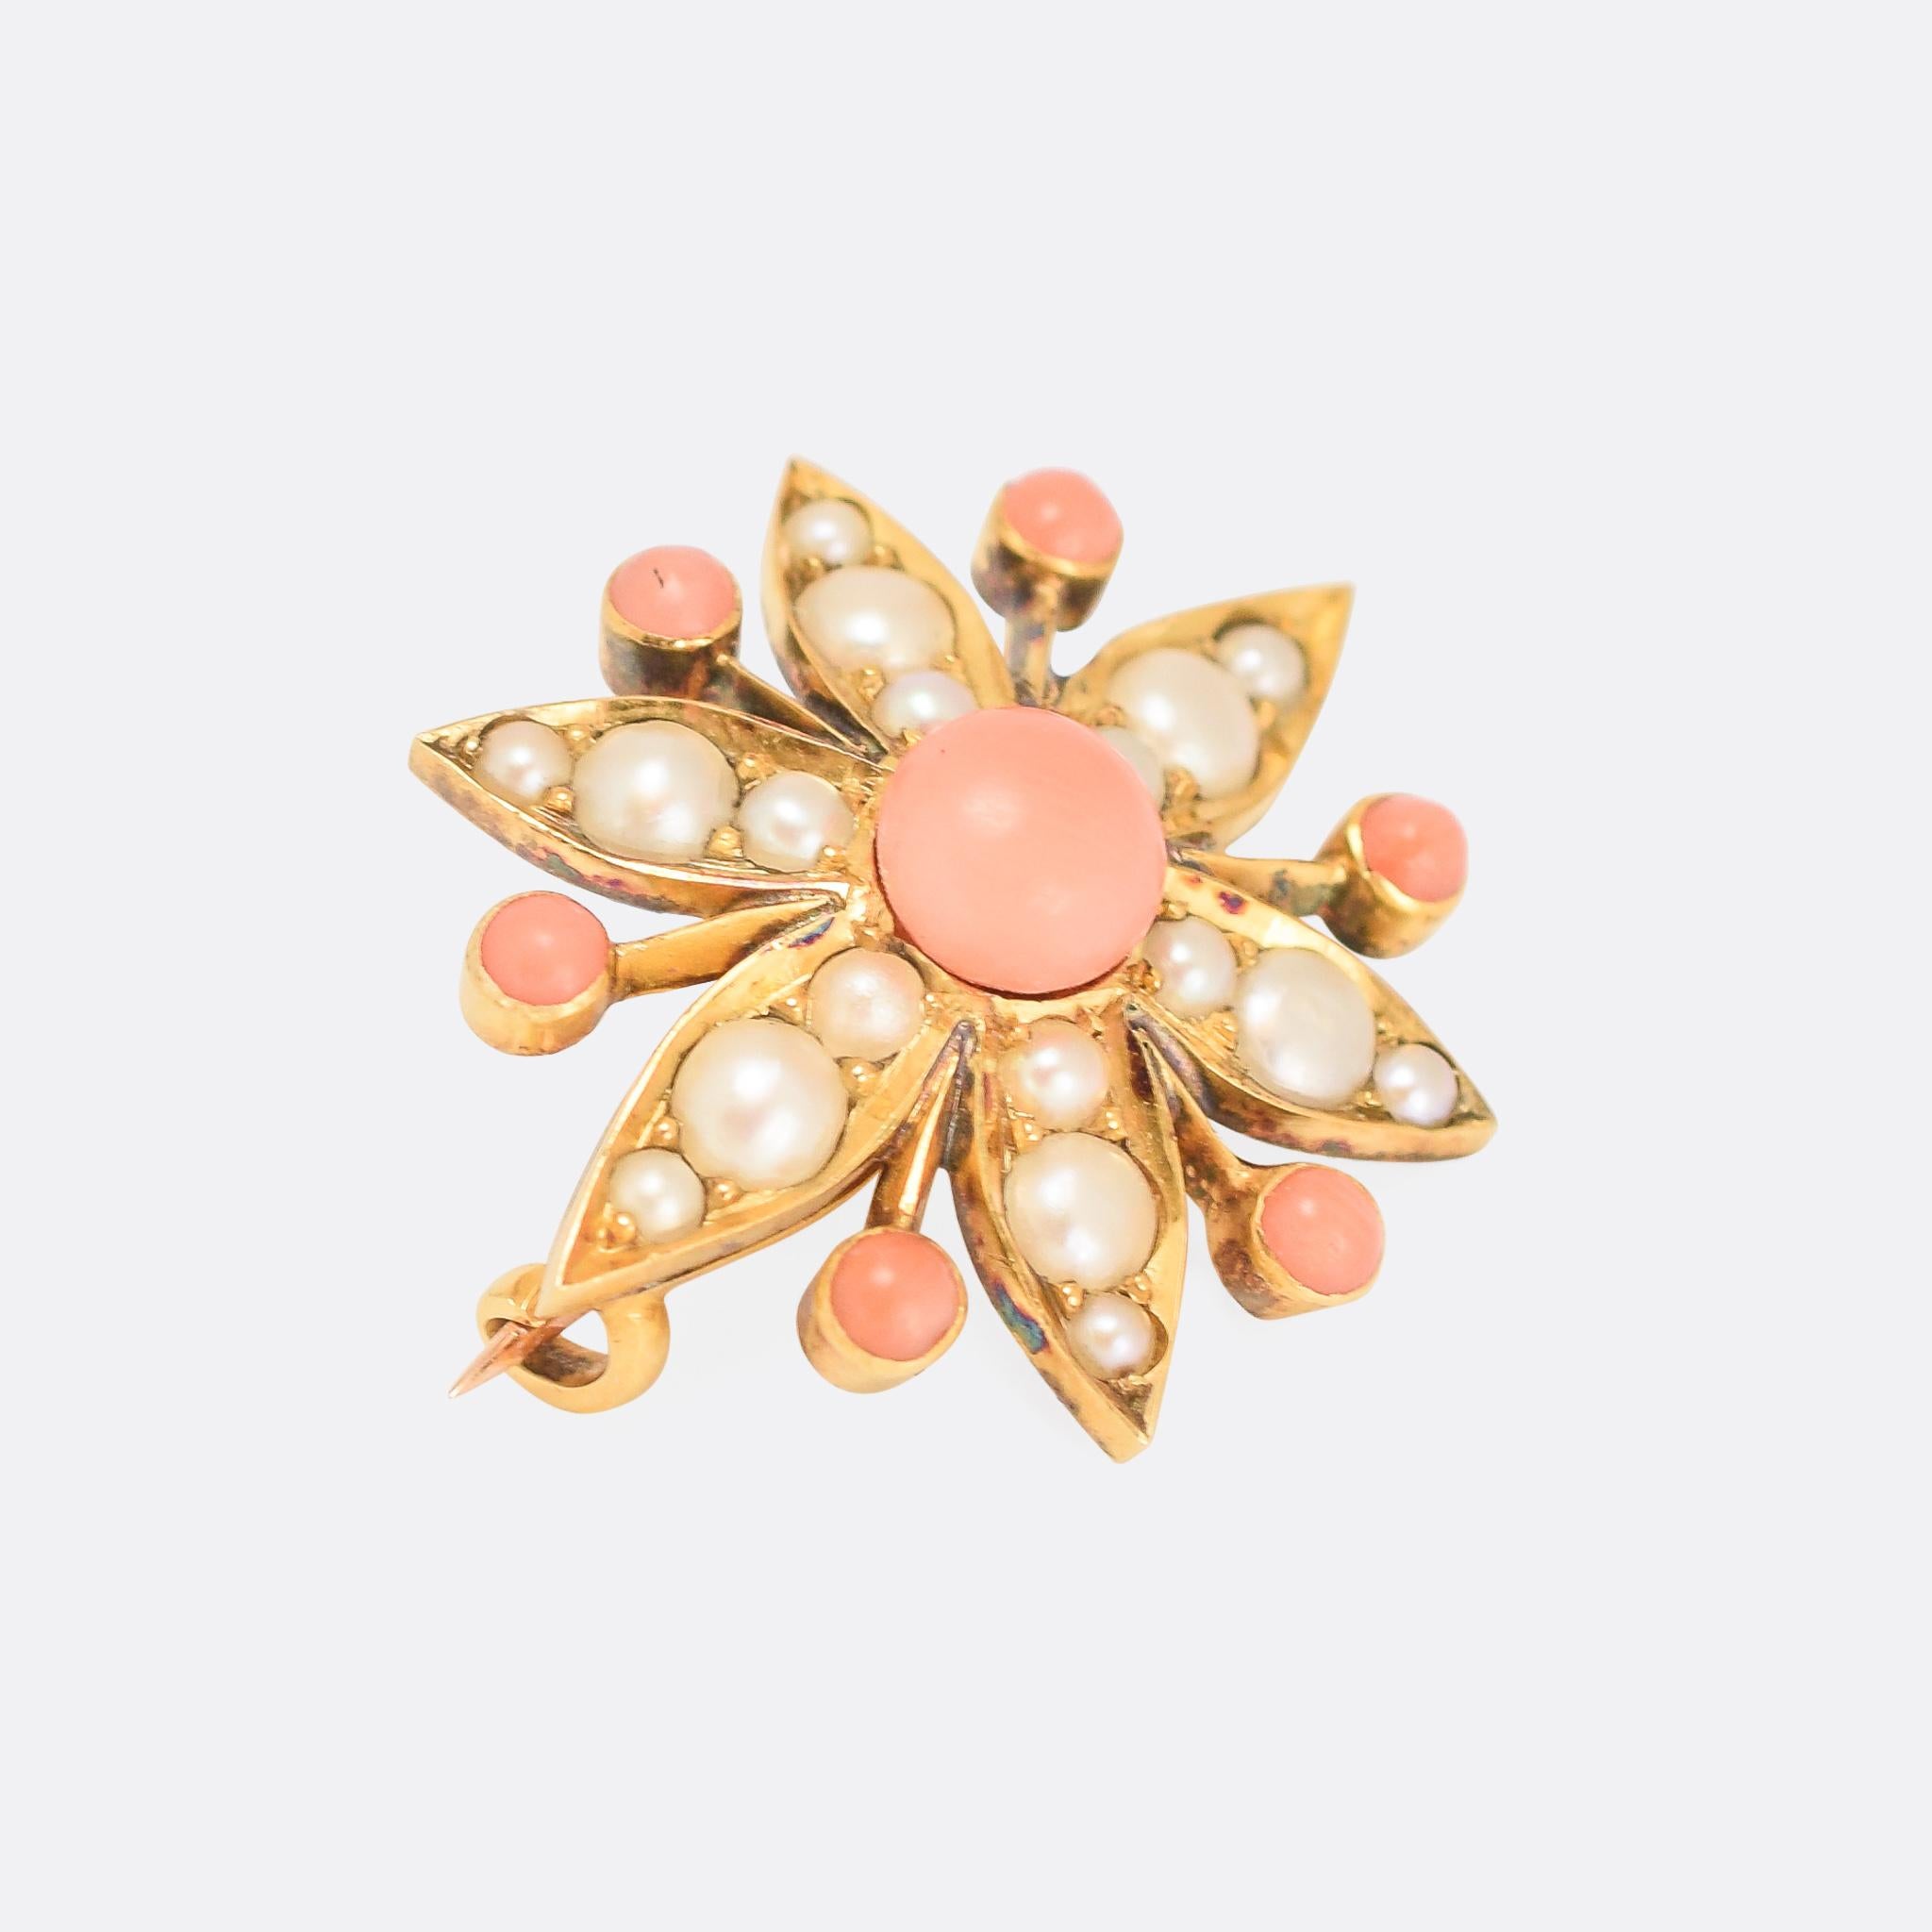 A gorgeous antique flower brooch set with coral and pearls. It's beautifully worked in 15 karat gold, with fine edges to the petals and a bezel set coral between each of them. Dating from the latter half of the 19th Century, circa 1880.

STONES